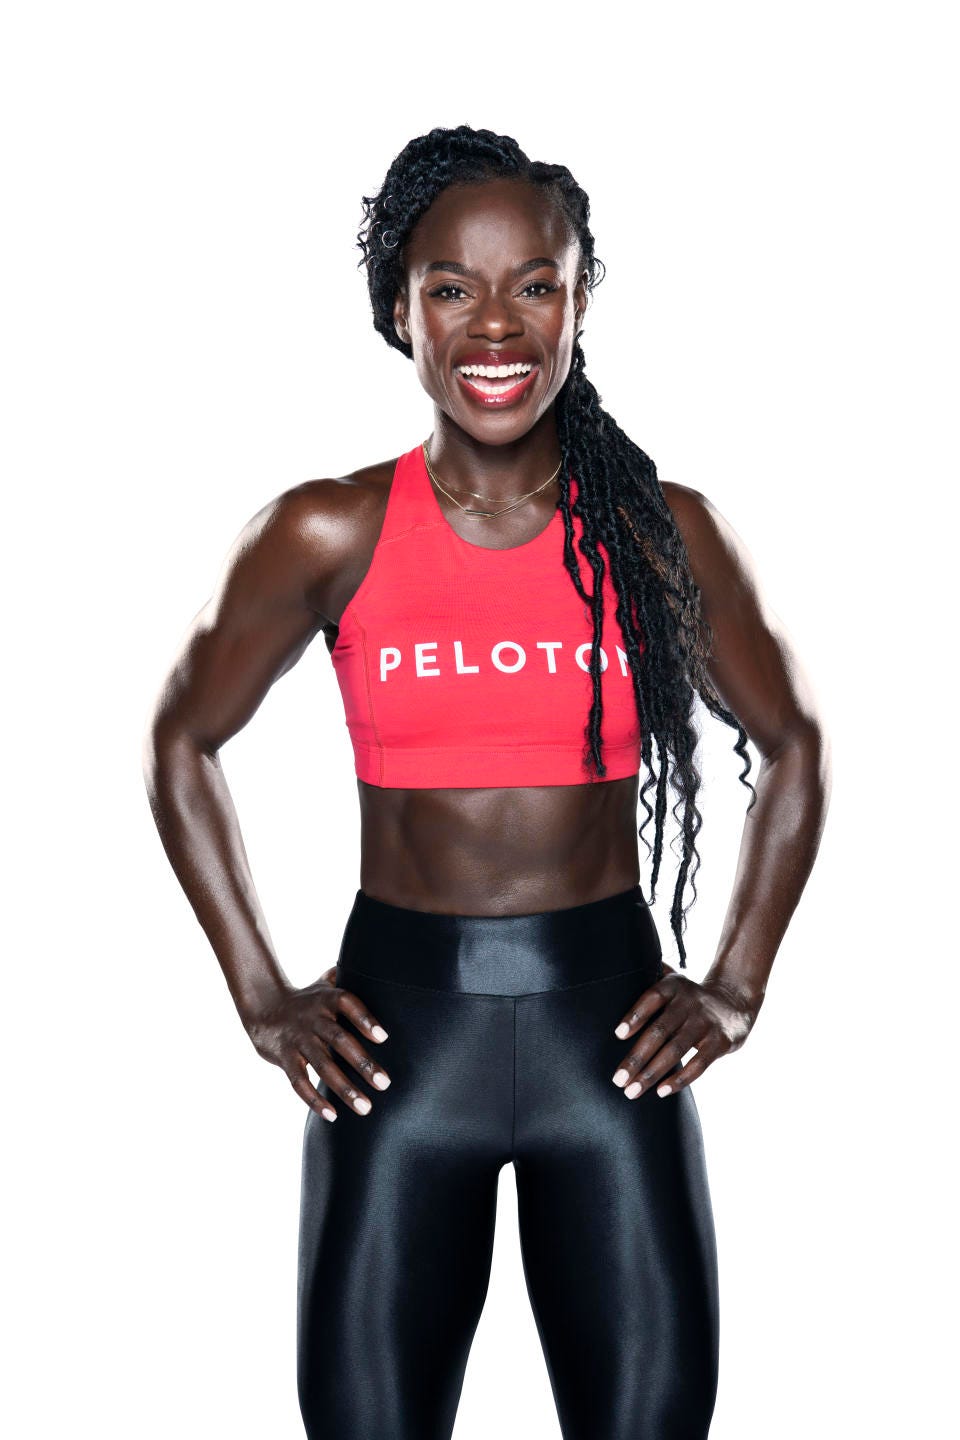 Peloton star Tunde Oyeneyin shares her tips for self-care and staying  disciplined: 'Focus on what you want to gain'